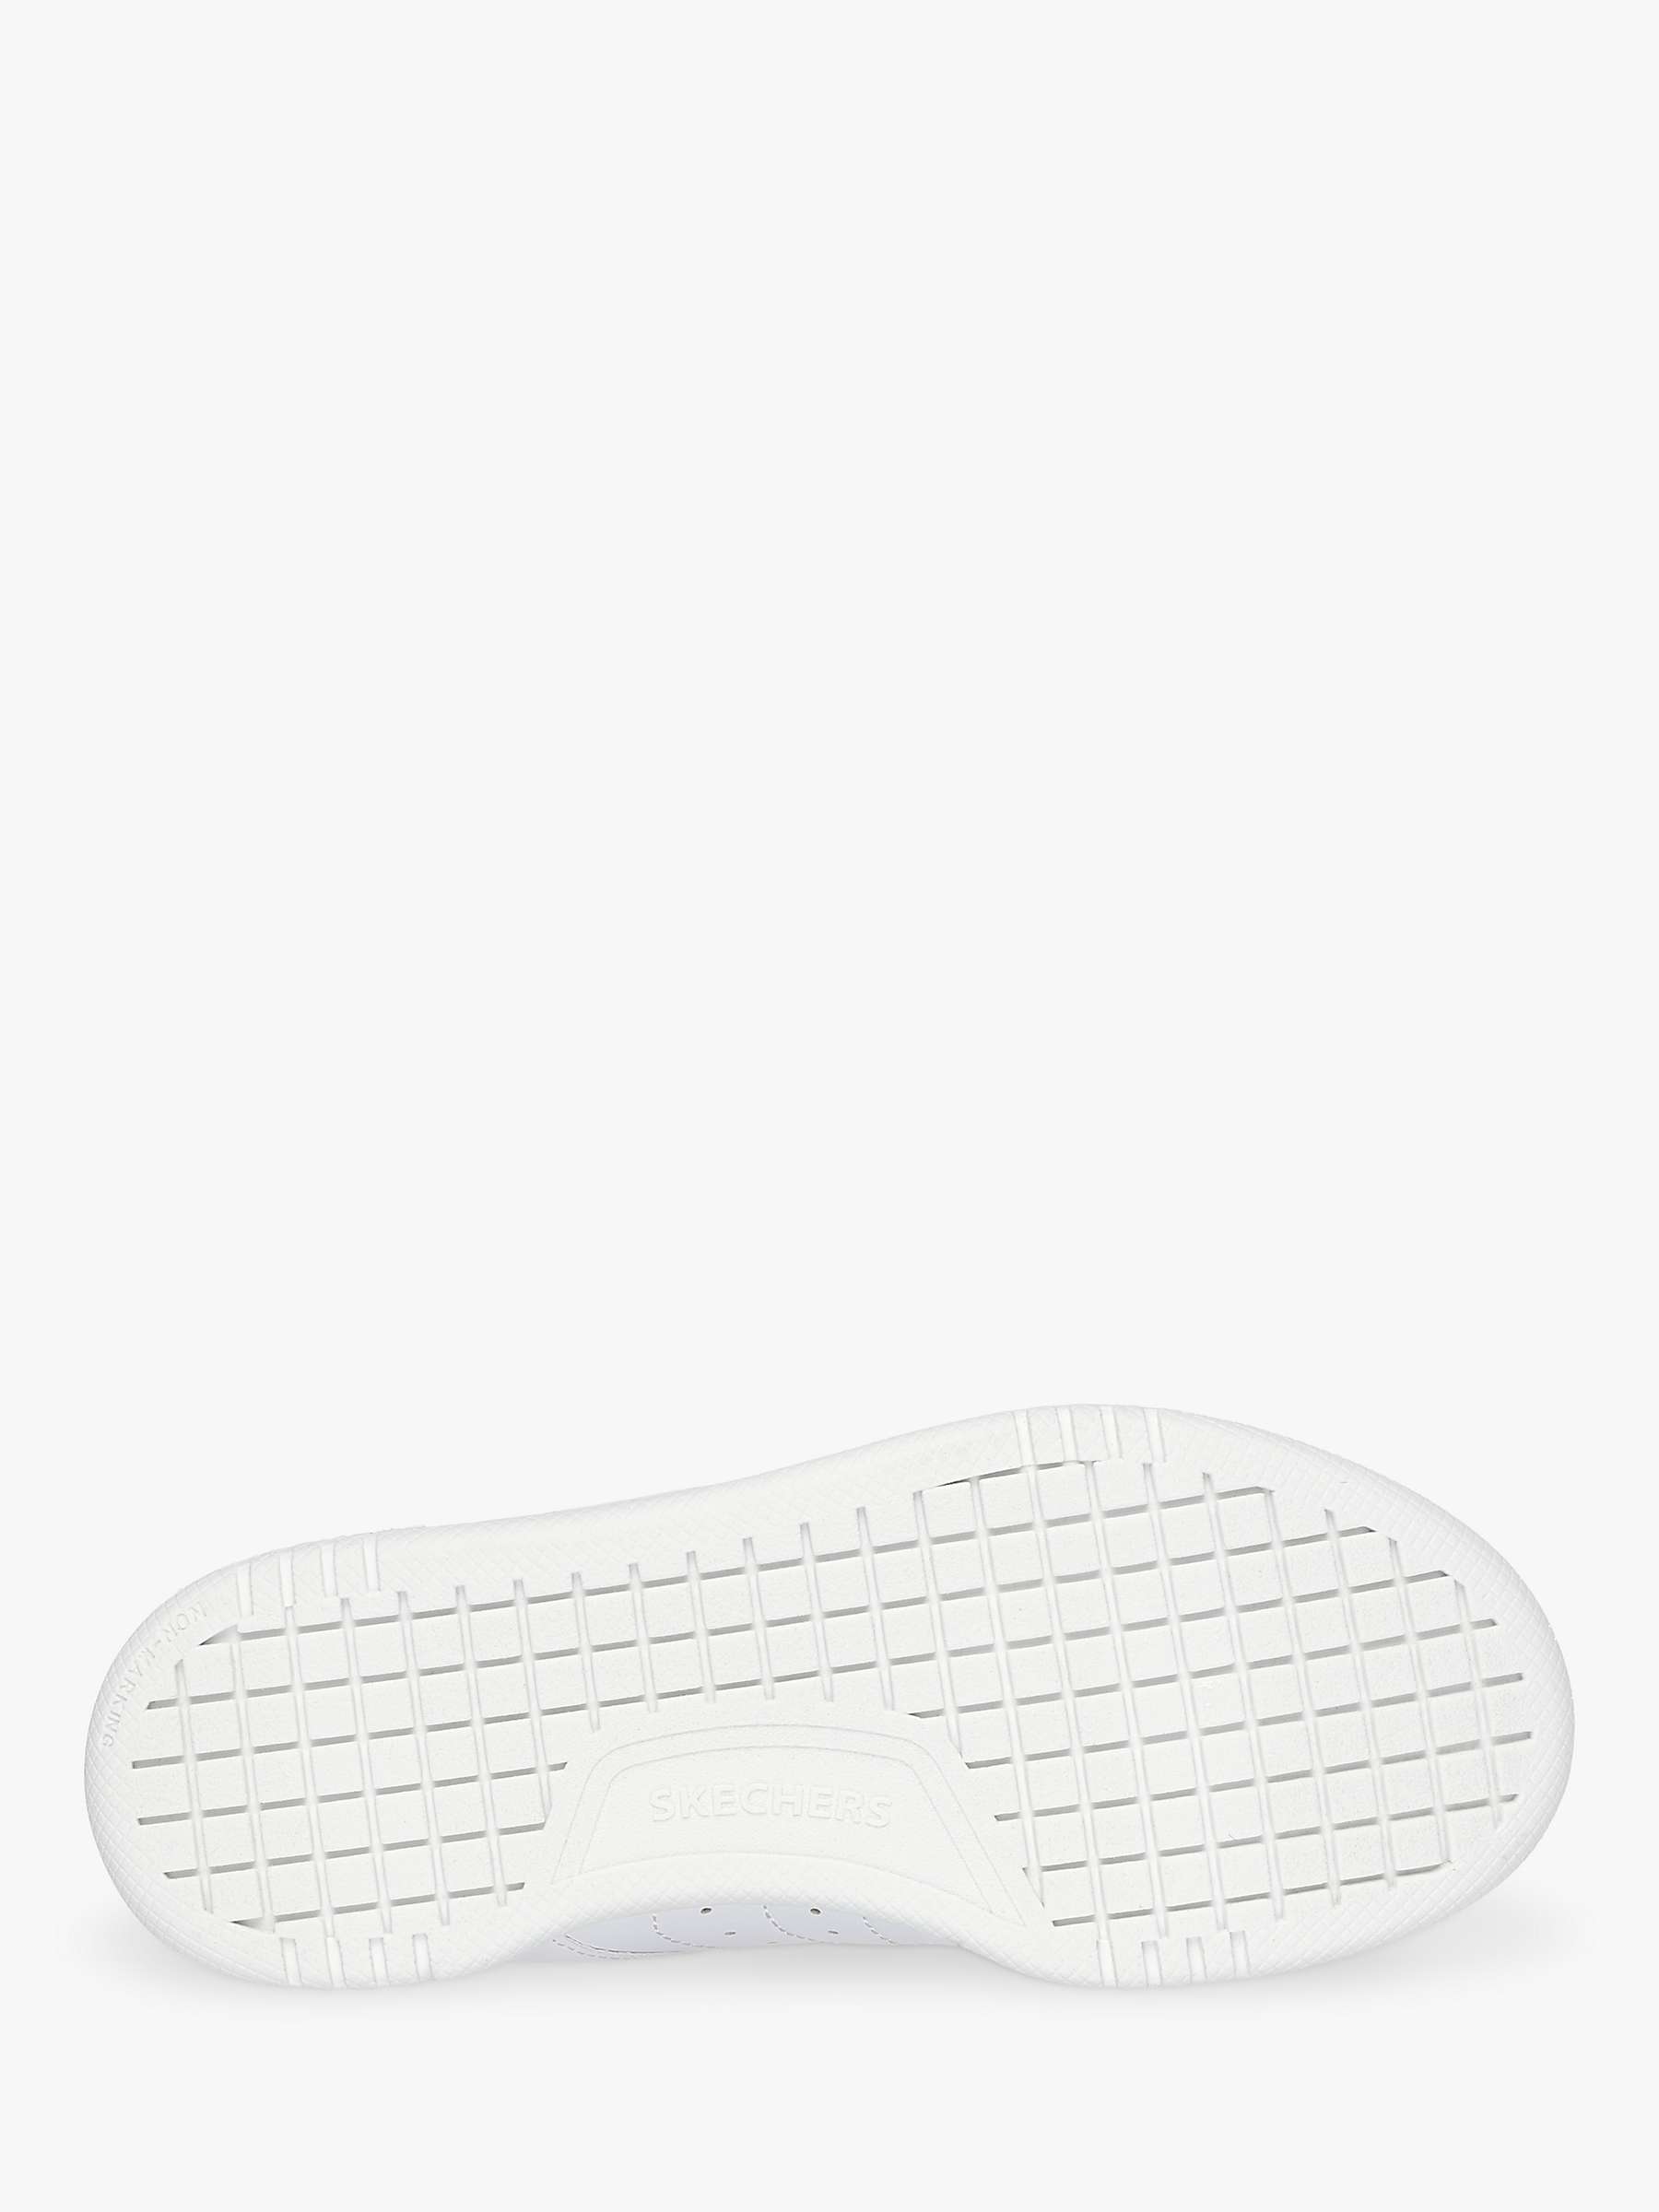 Buy Skechers Kids' Quick Street Trainers, White Online at johnlewis.com